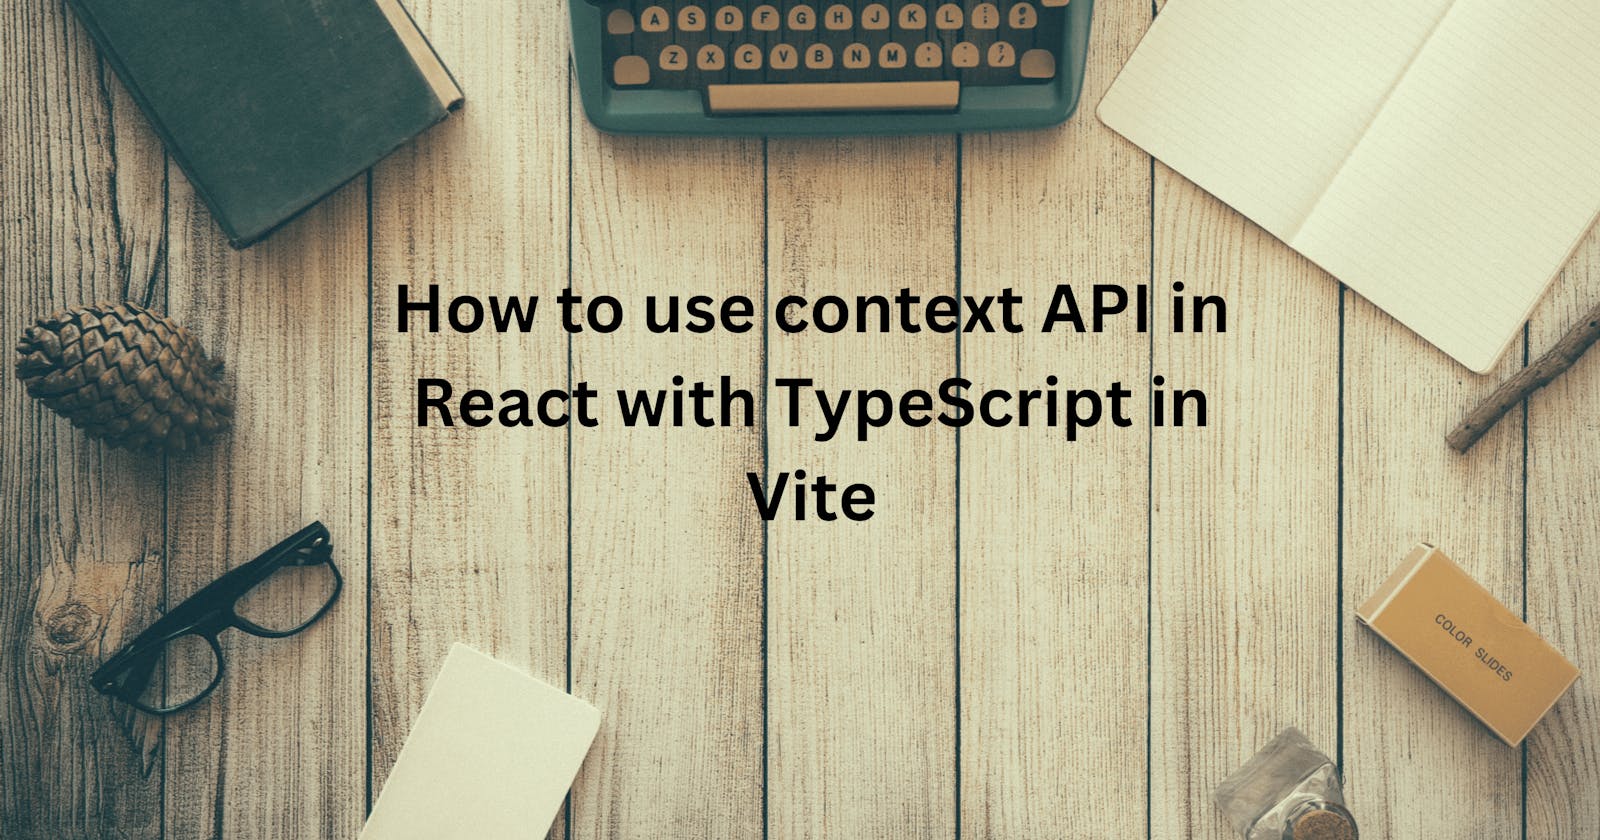 How to use context API in React with TypeScript in Vite